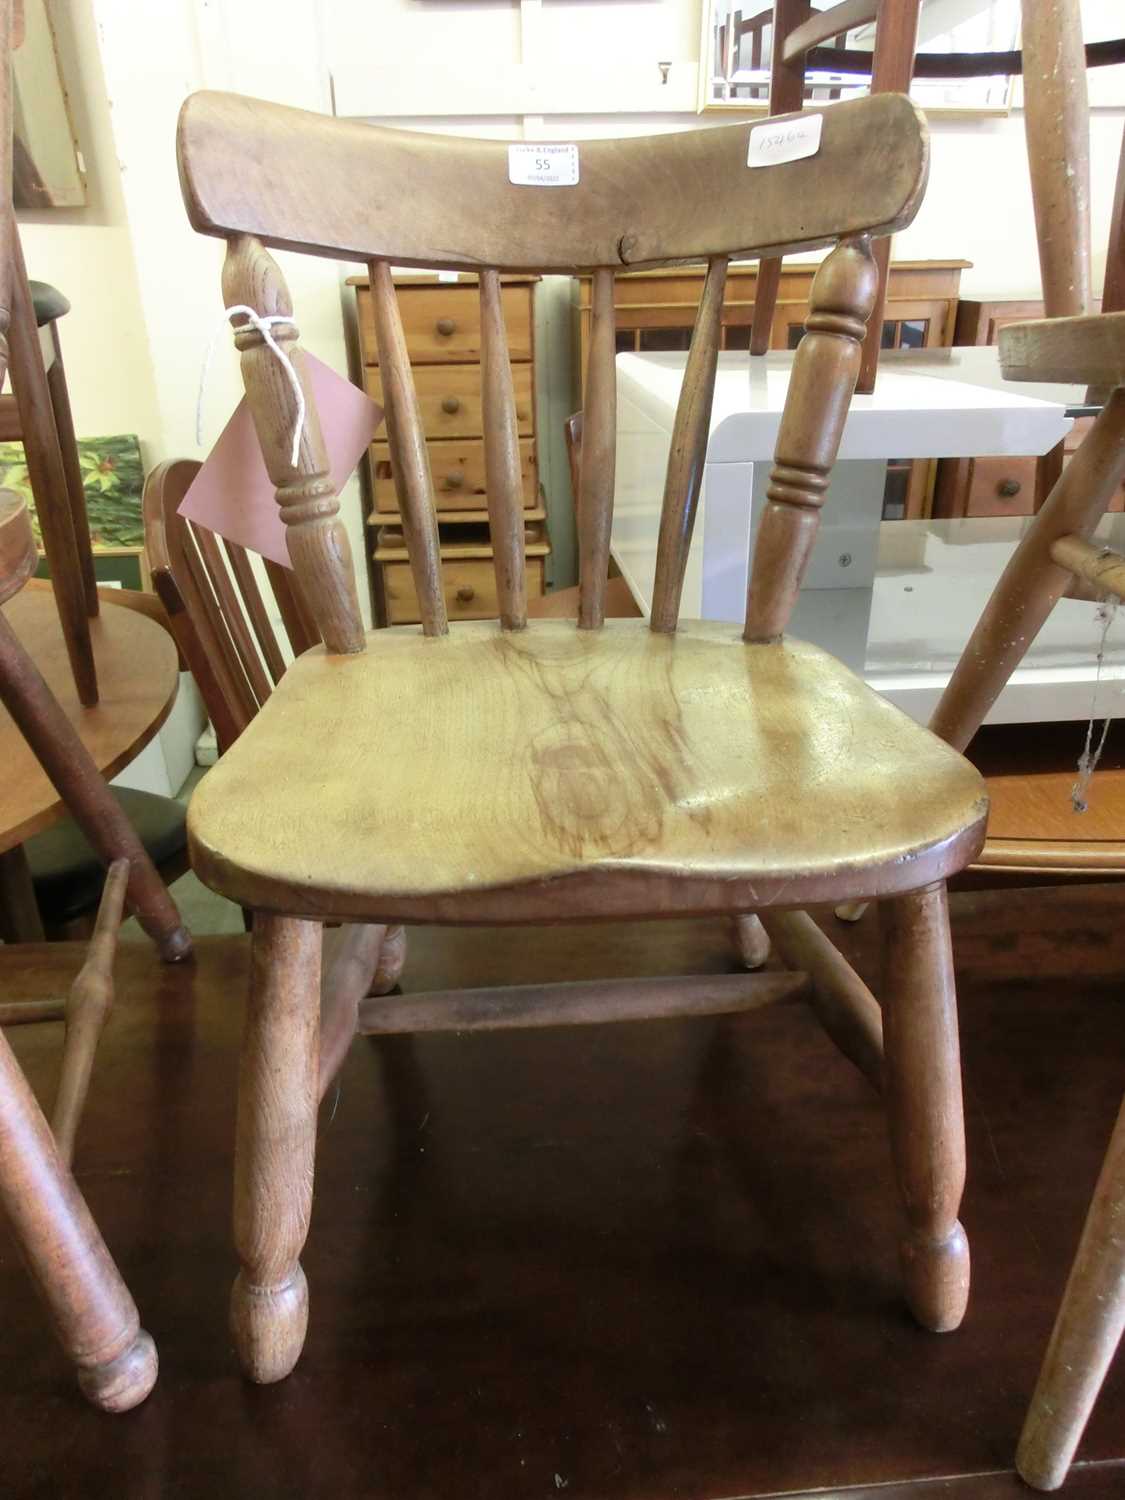 A spindle back child's chair